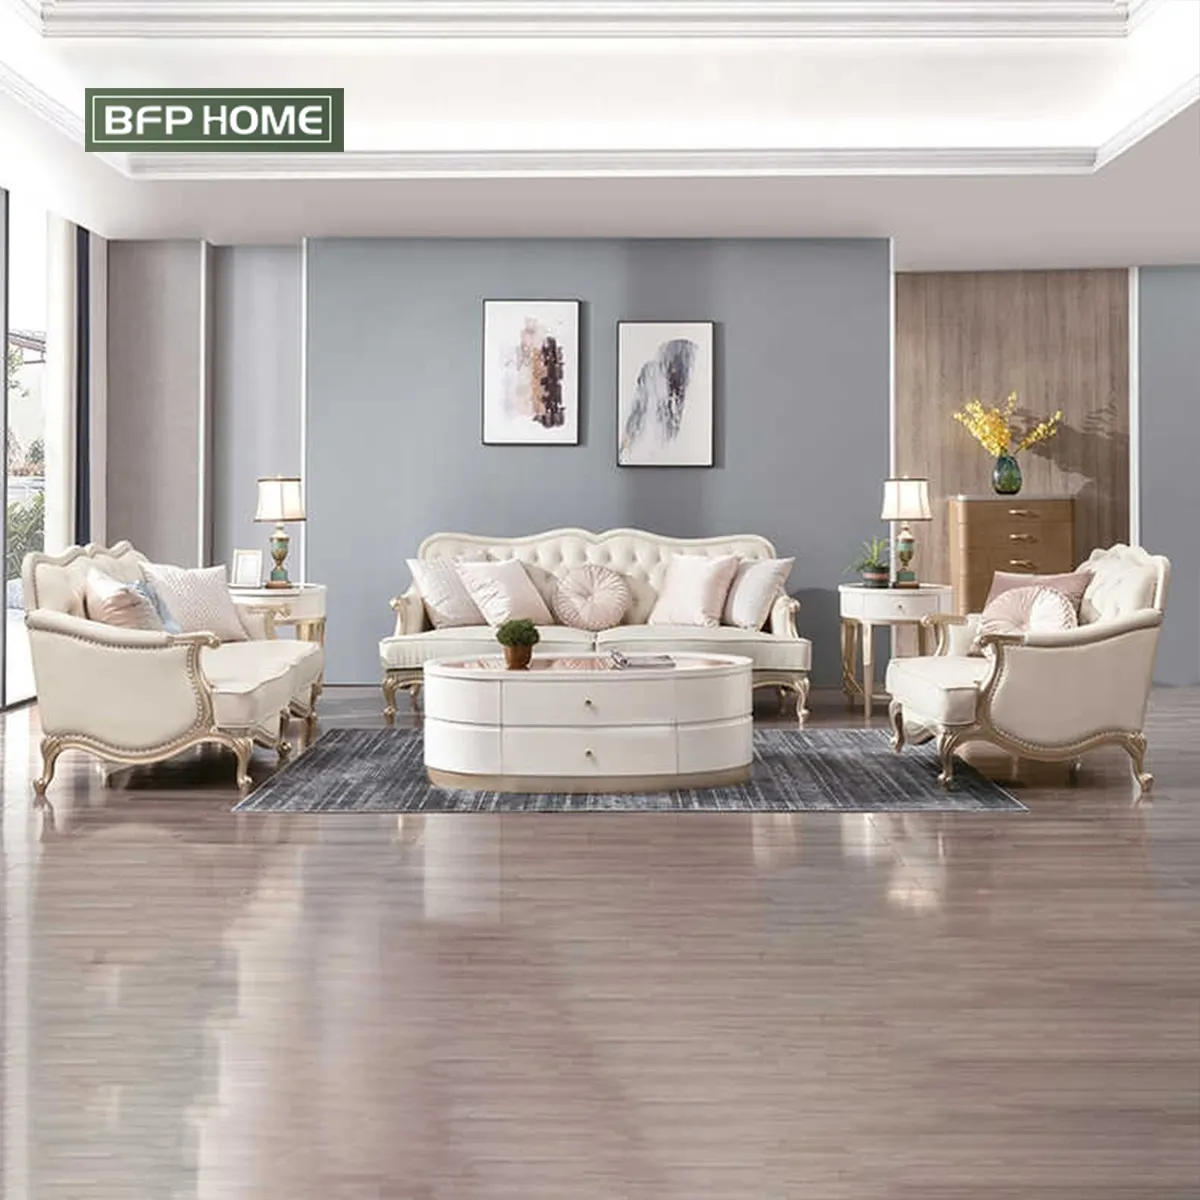 BFP HOME American Luxury Style Solid wood furniture Living Room Modern Sofa Set with Gold/Silver paint